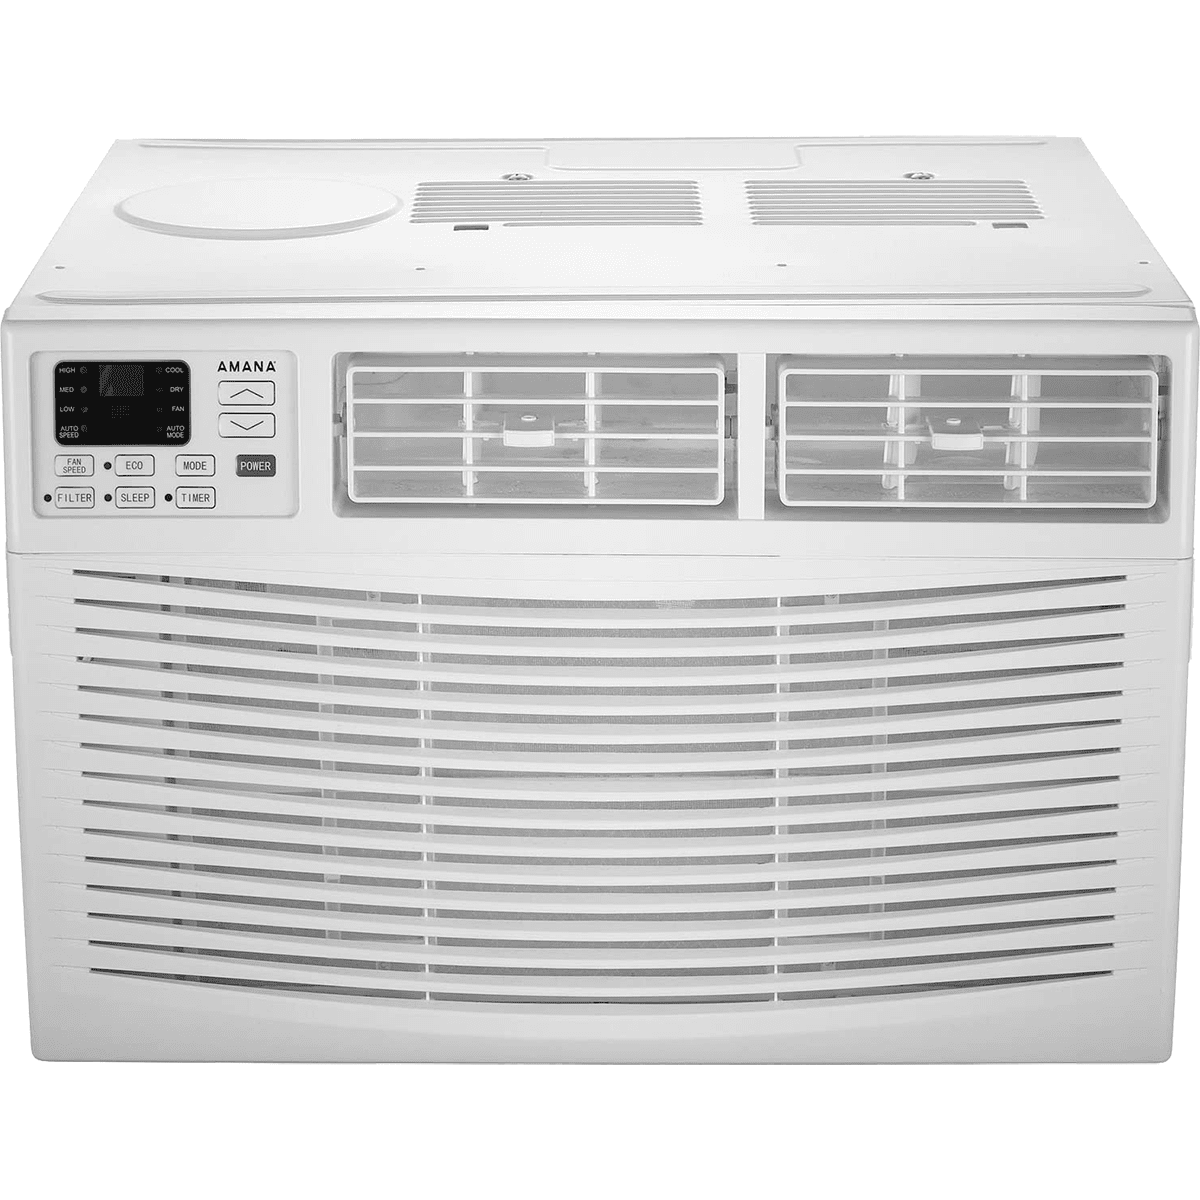 Amana 12,000 BTU Window Air Conditioner with Electronic Controls AMAP121BW